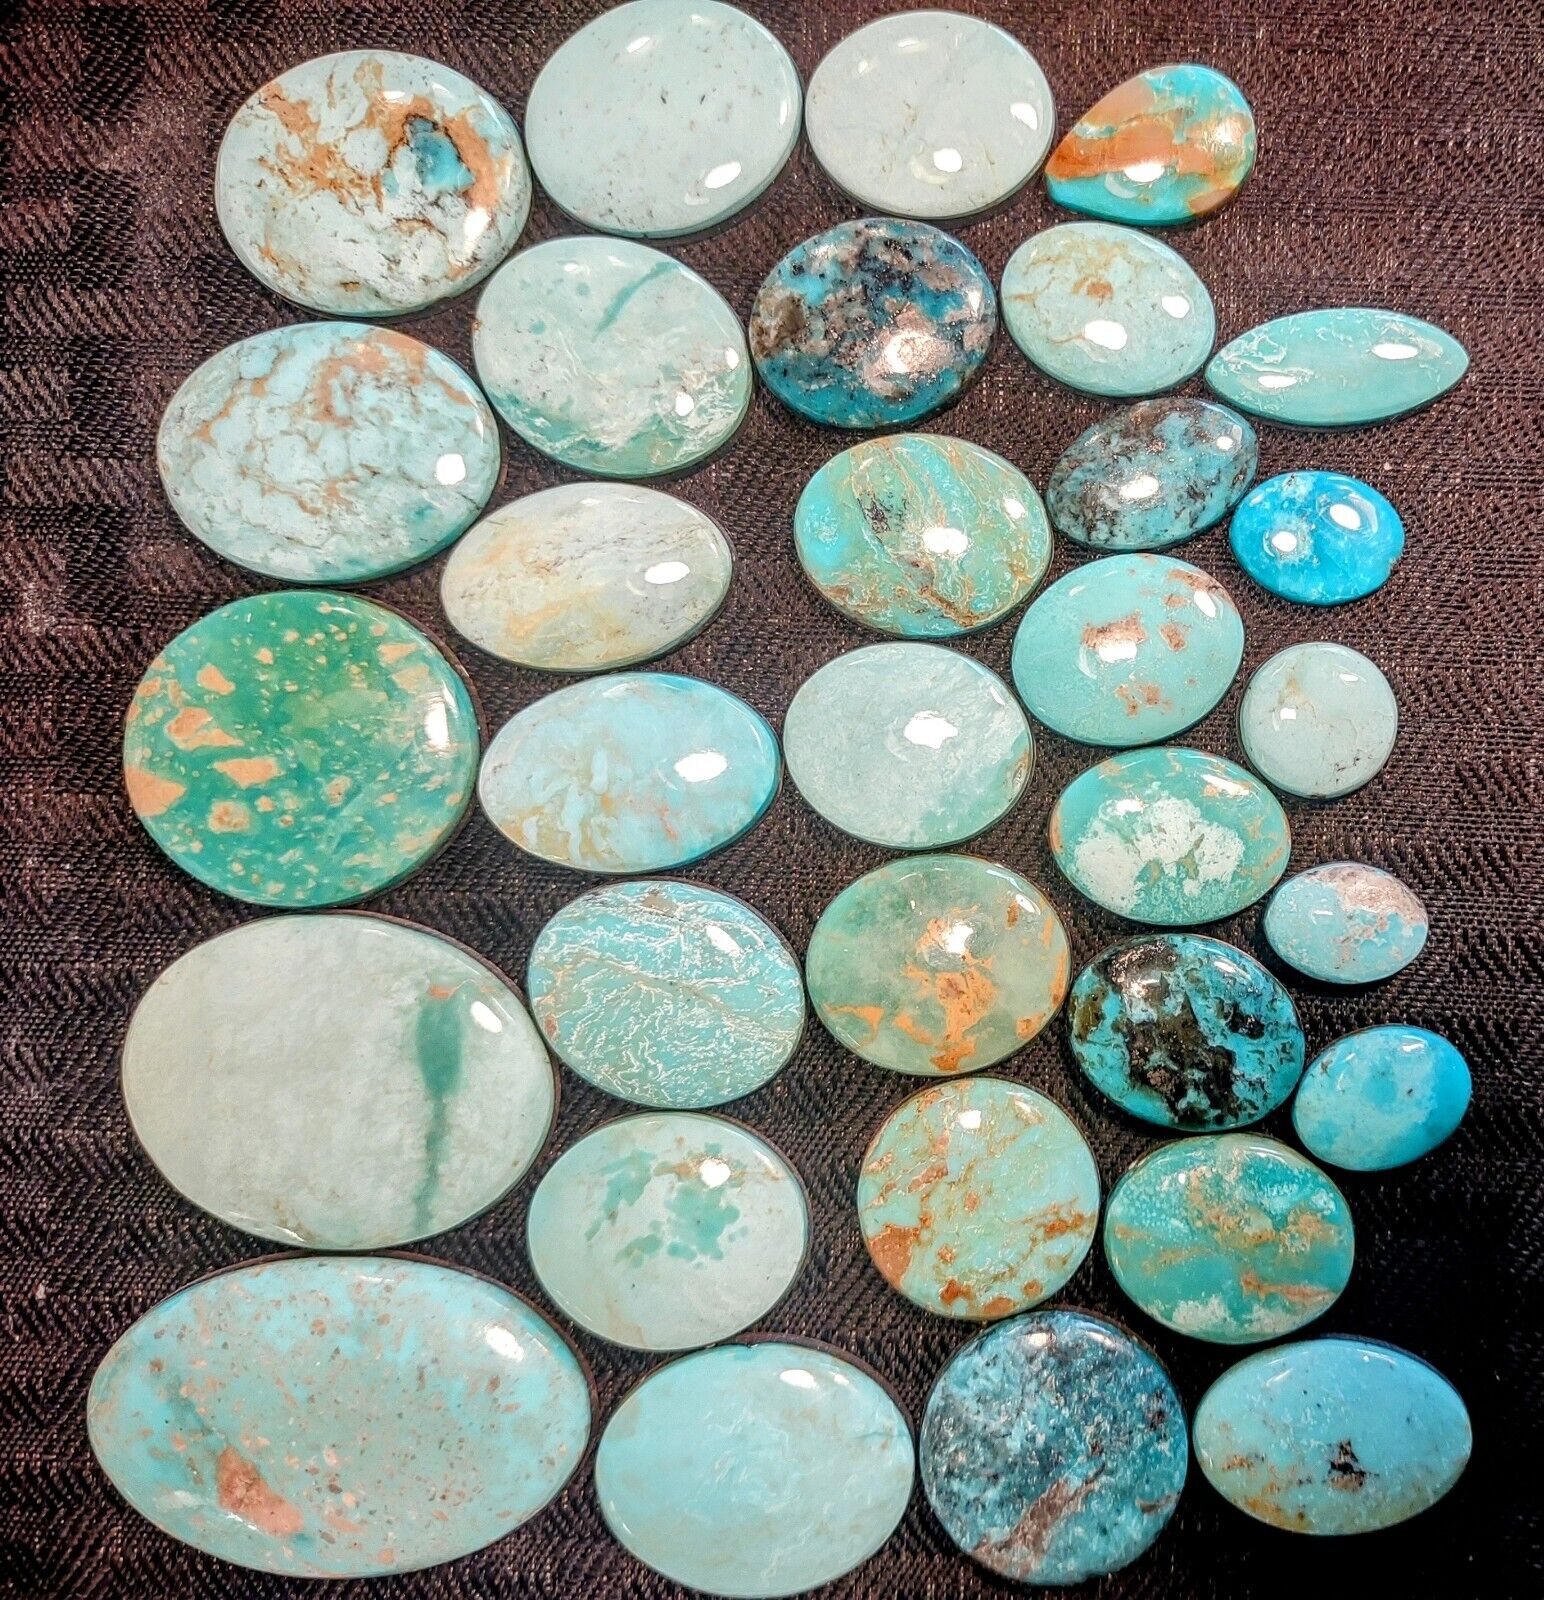 540ct. 32pc. Various Arizona, Mex Mines Turquoise Cab A Few Flaws, All Backed